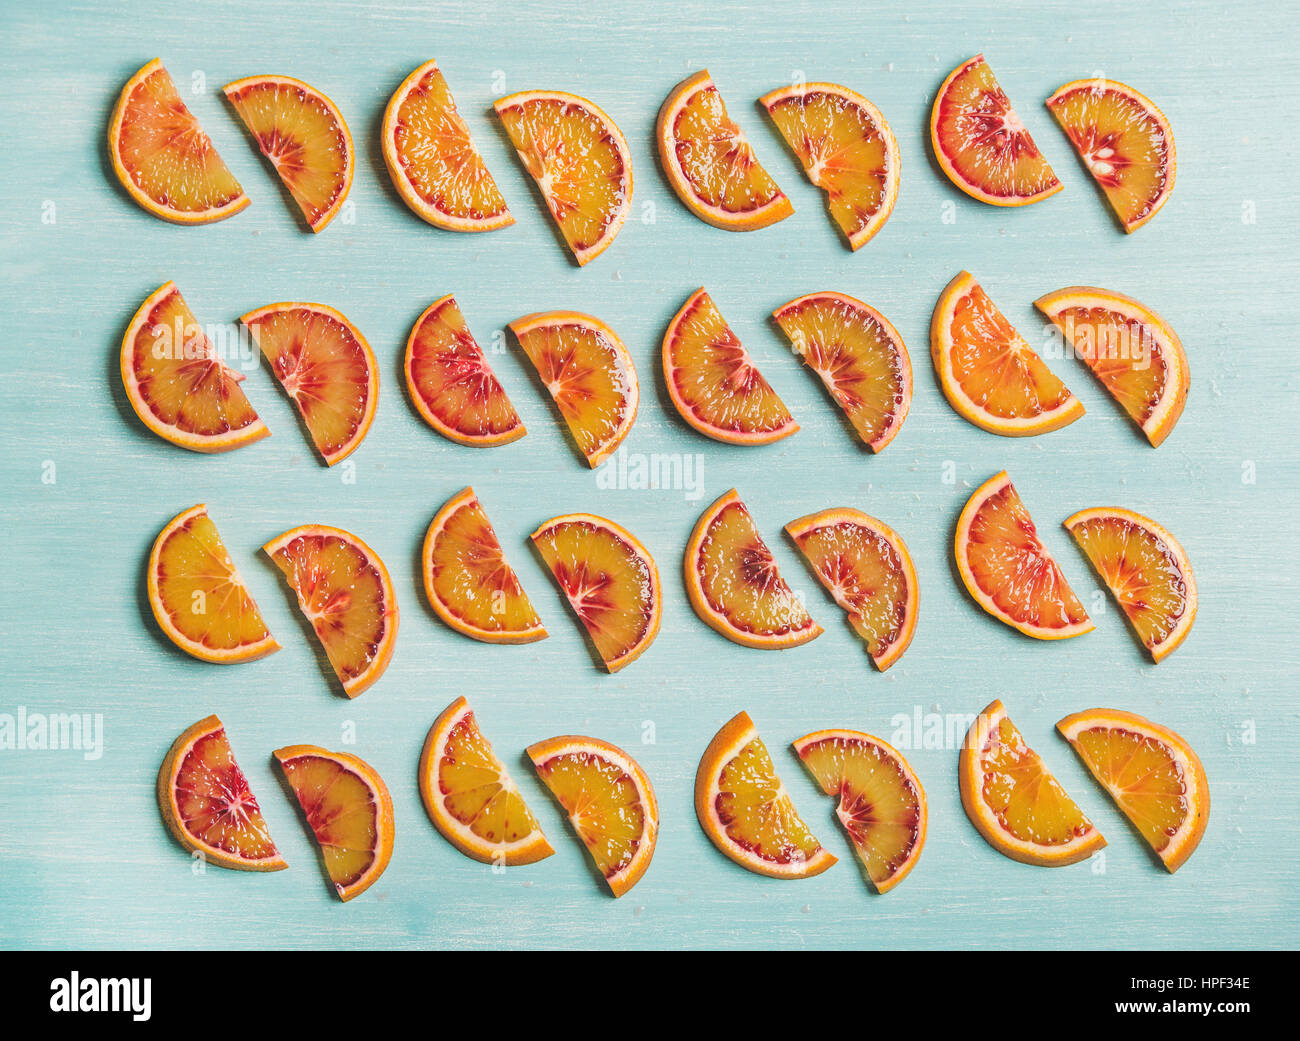 Natural fruit pattern concept. Fresh juicy blood orange slices placed in rows over light blue painted table background, top view Stock Photo